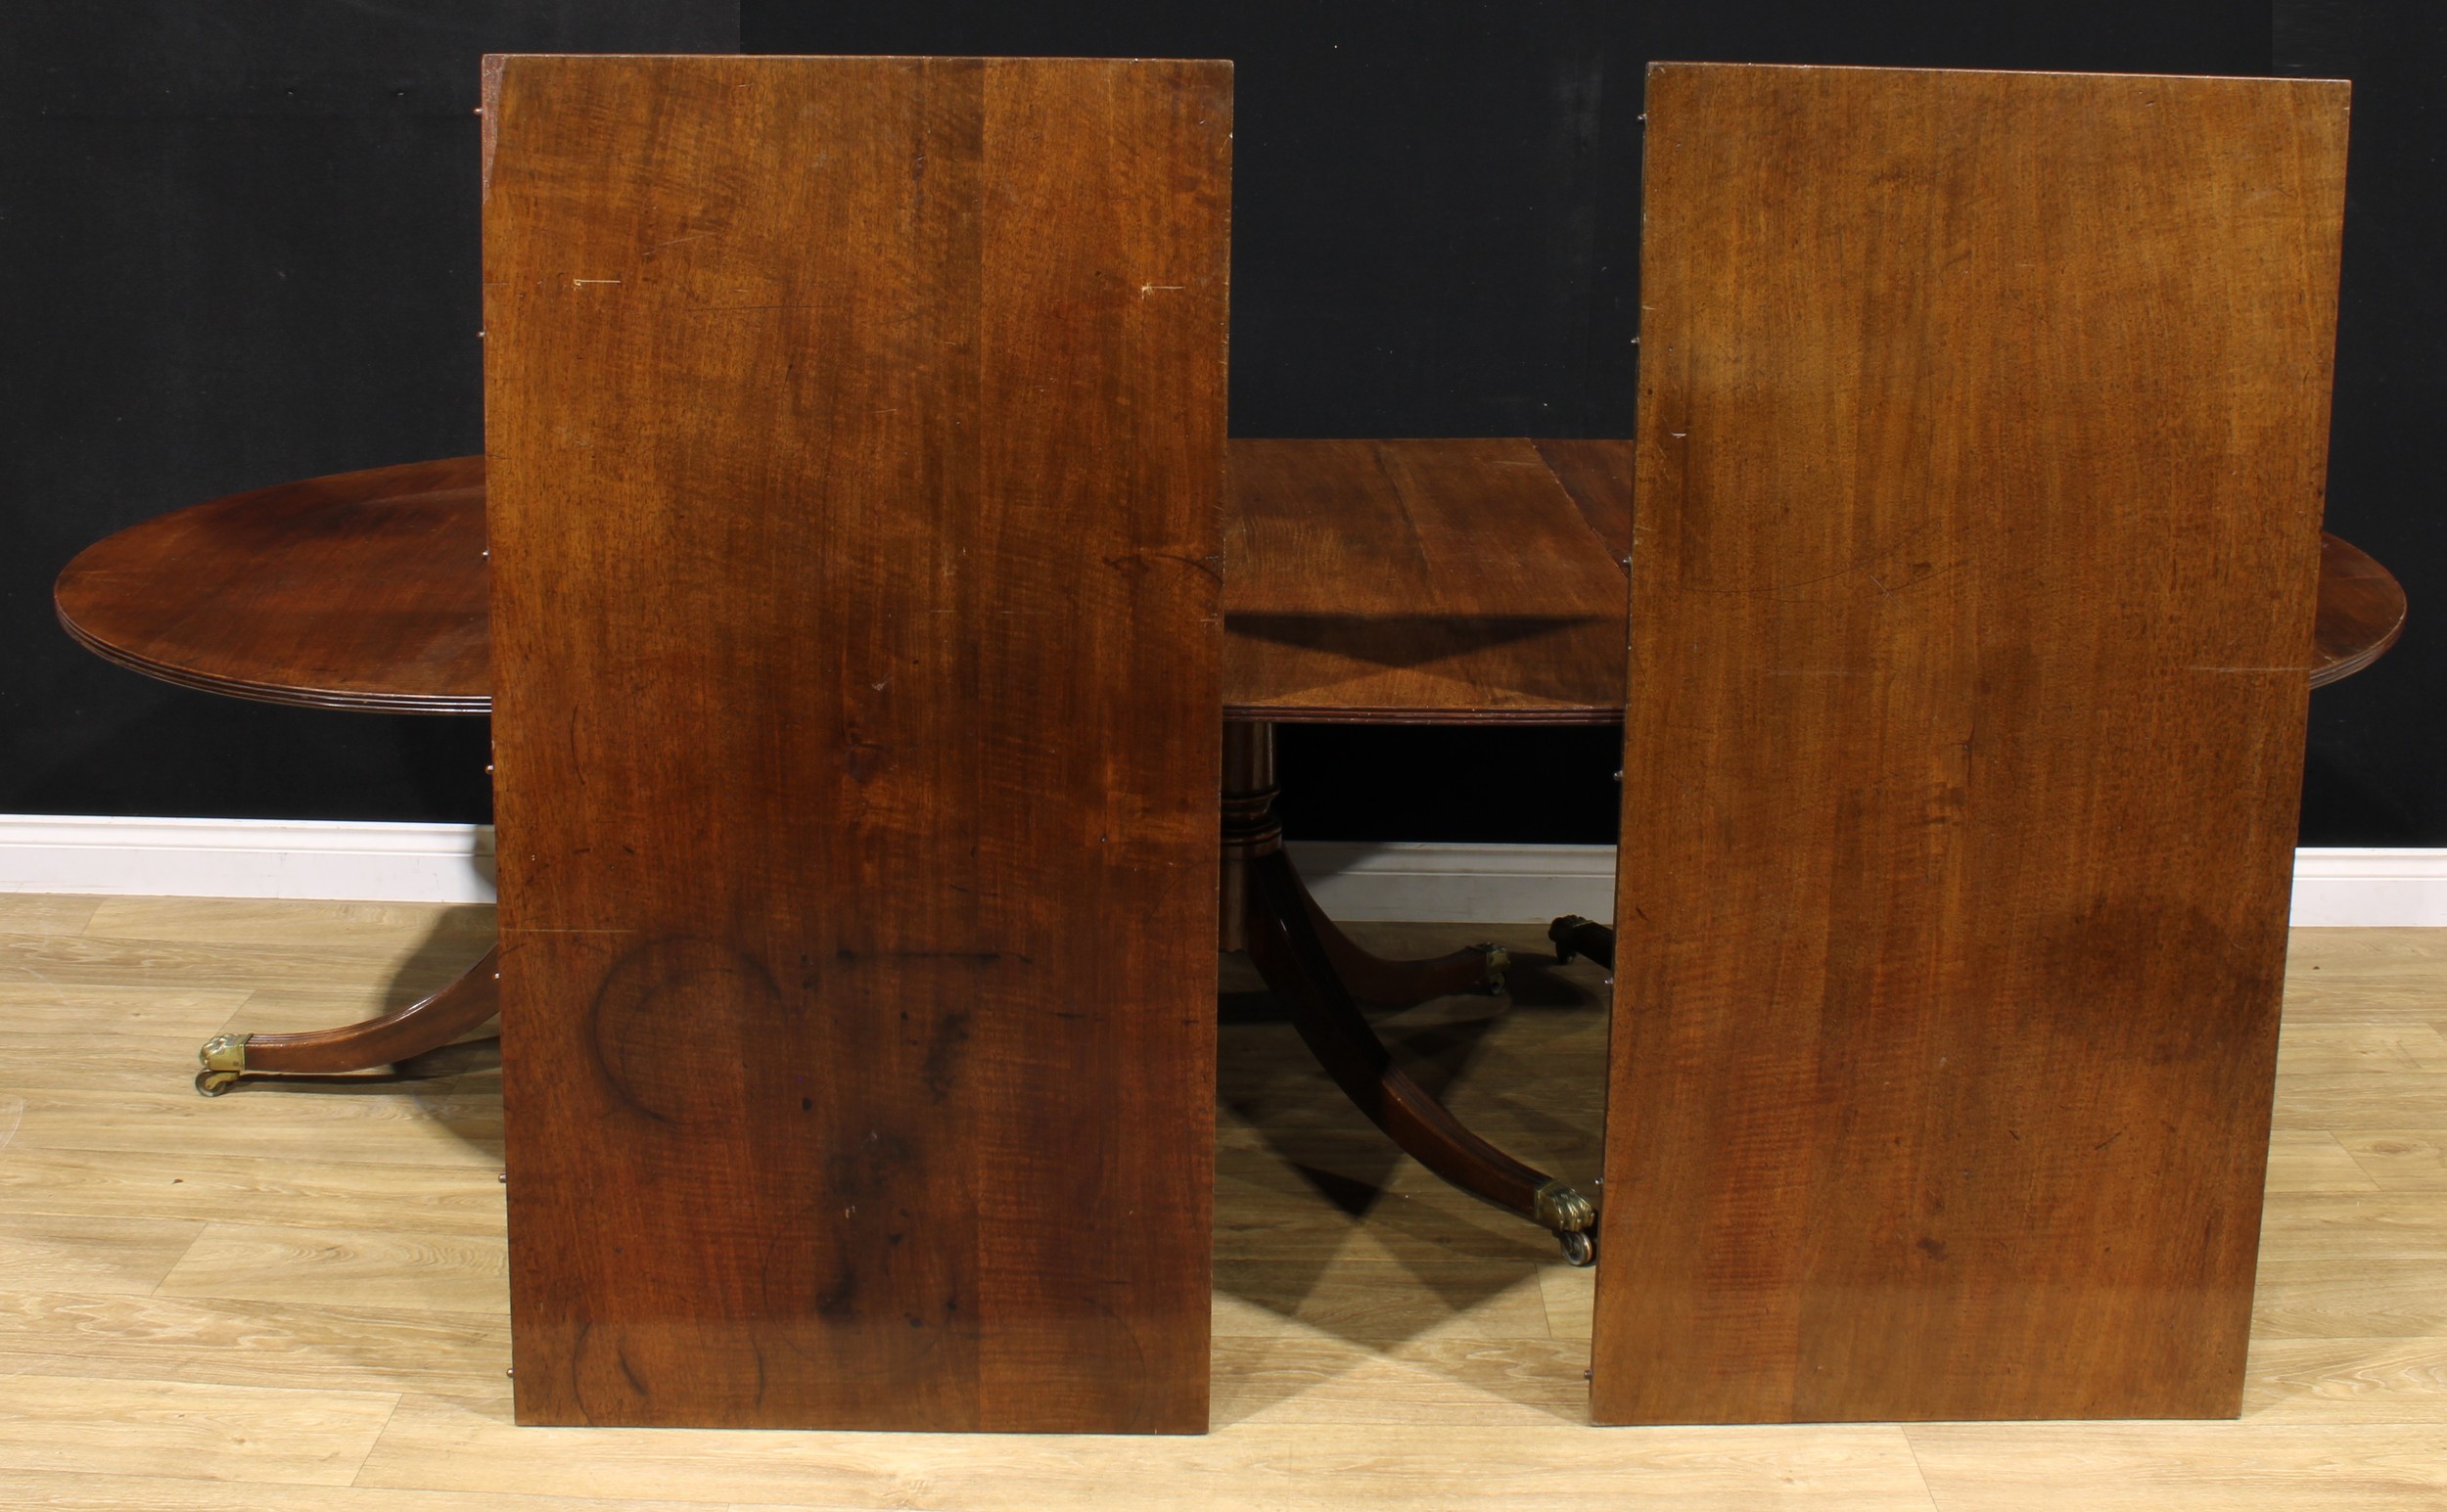 A large Regency Revival mahogany triple-pillar dining table, discorectangular top with reeded edge, - Image 3 of 3